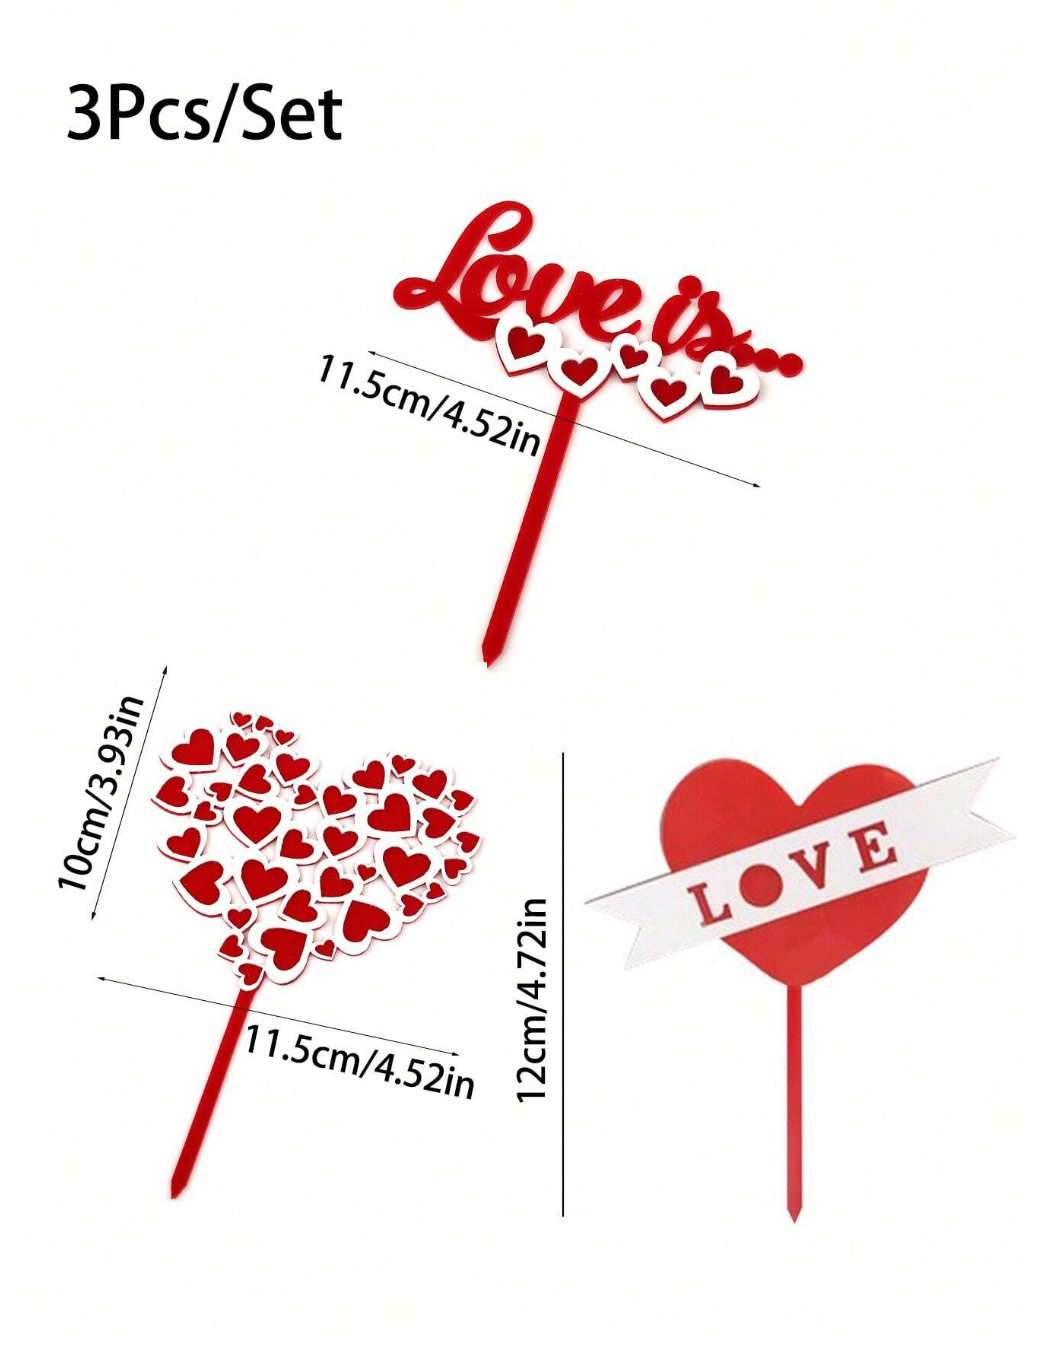 Love on Top: 5-Piece Acrylic Delight for Valentine's Day Cakes - Heartfelt Cake Toppers for a Sweet Celebration!